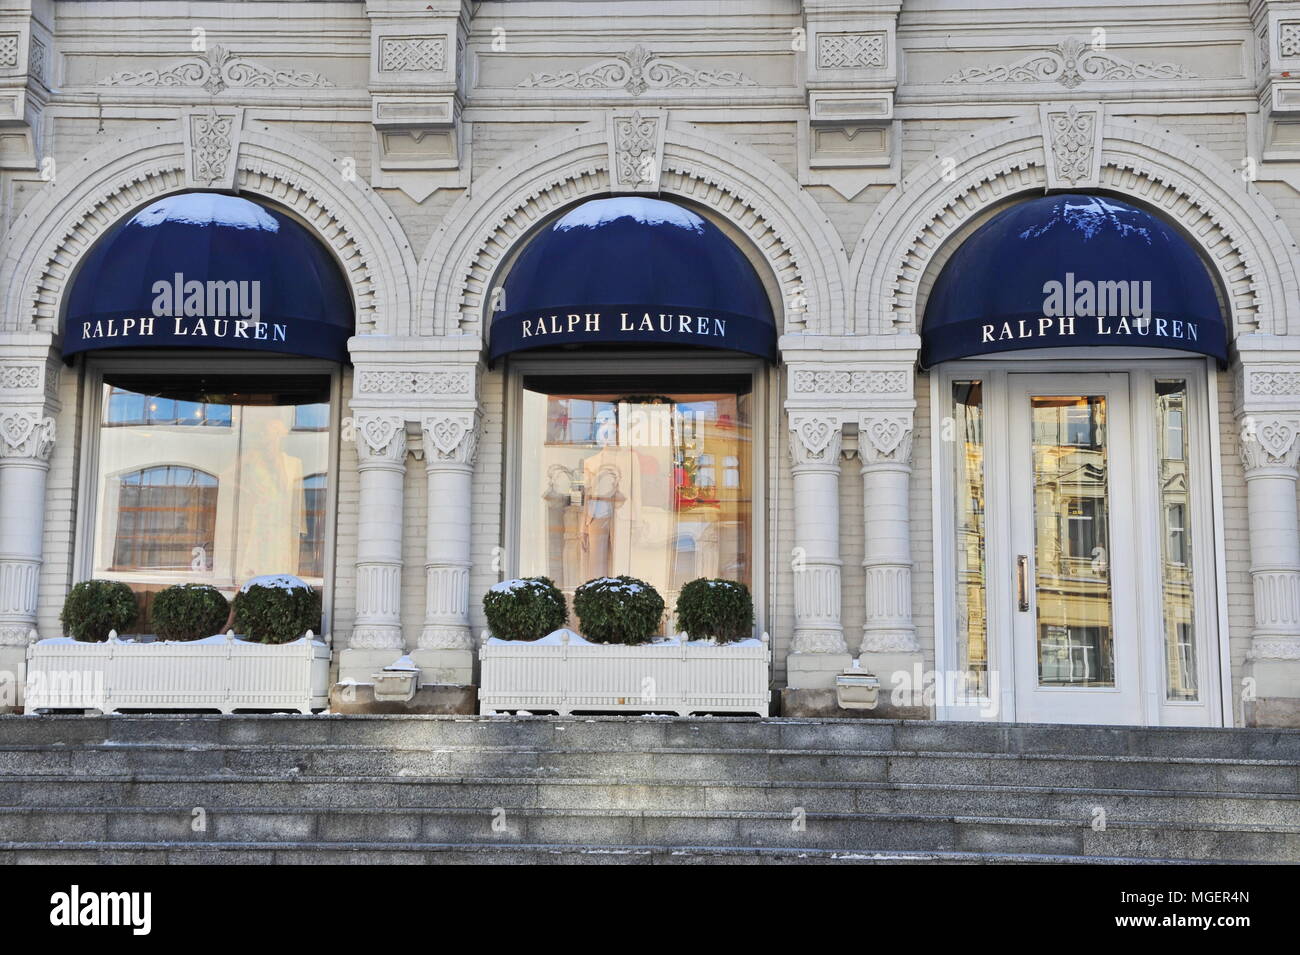 MOSCOW, RUSSIA - FEBRUARY 13: Ralph Lauren flagship store, Moscow